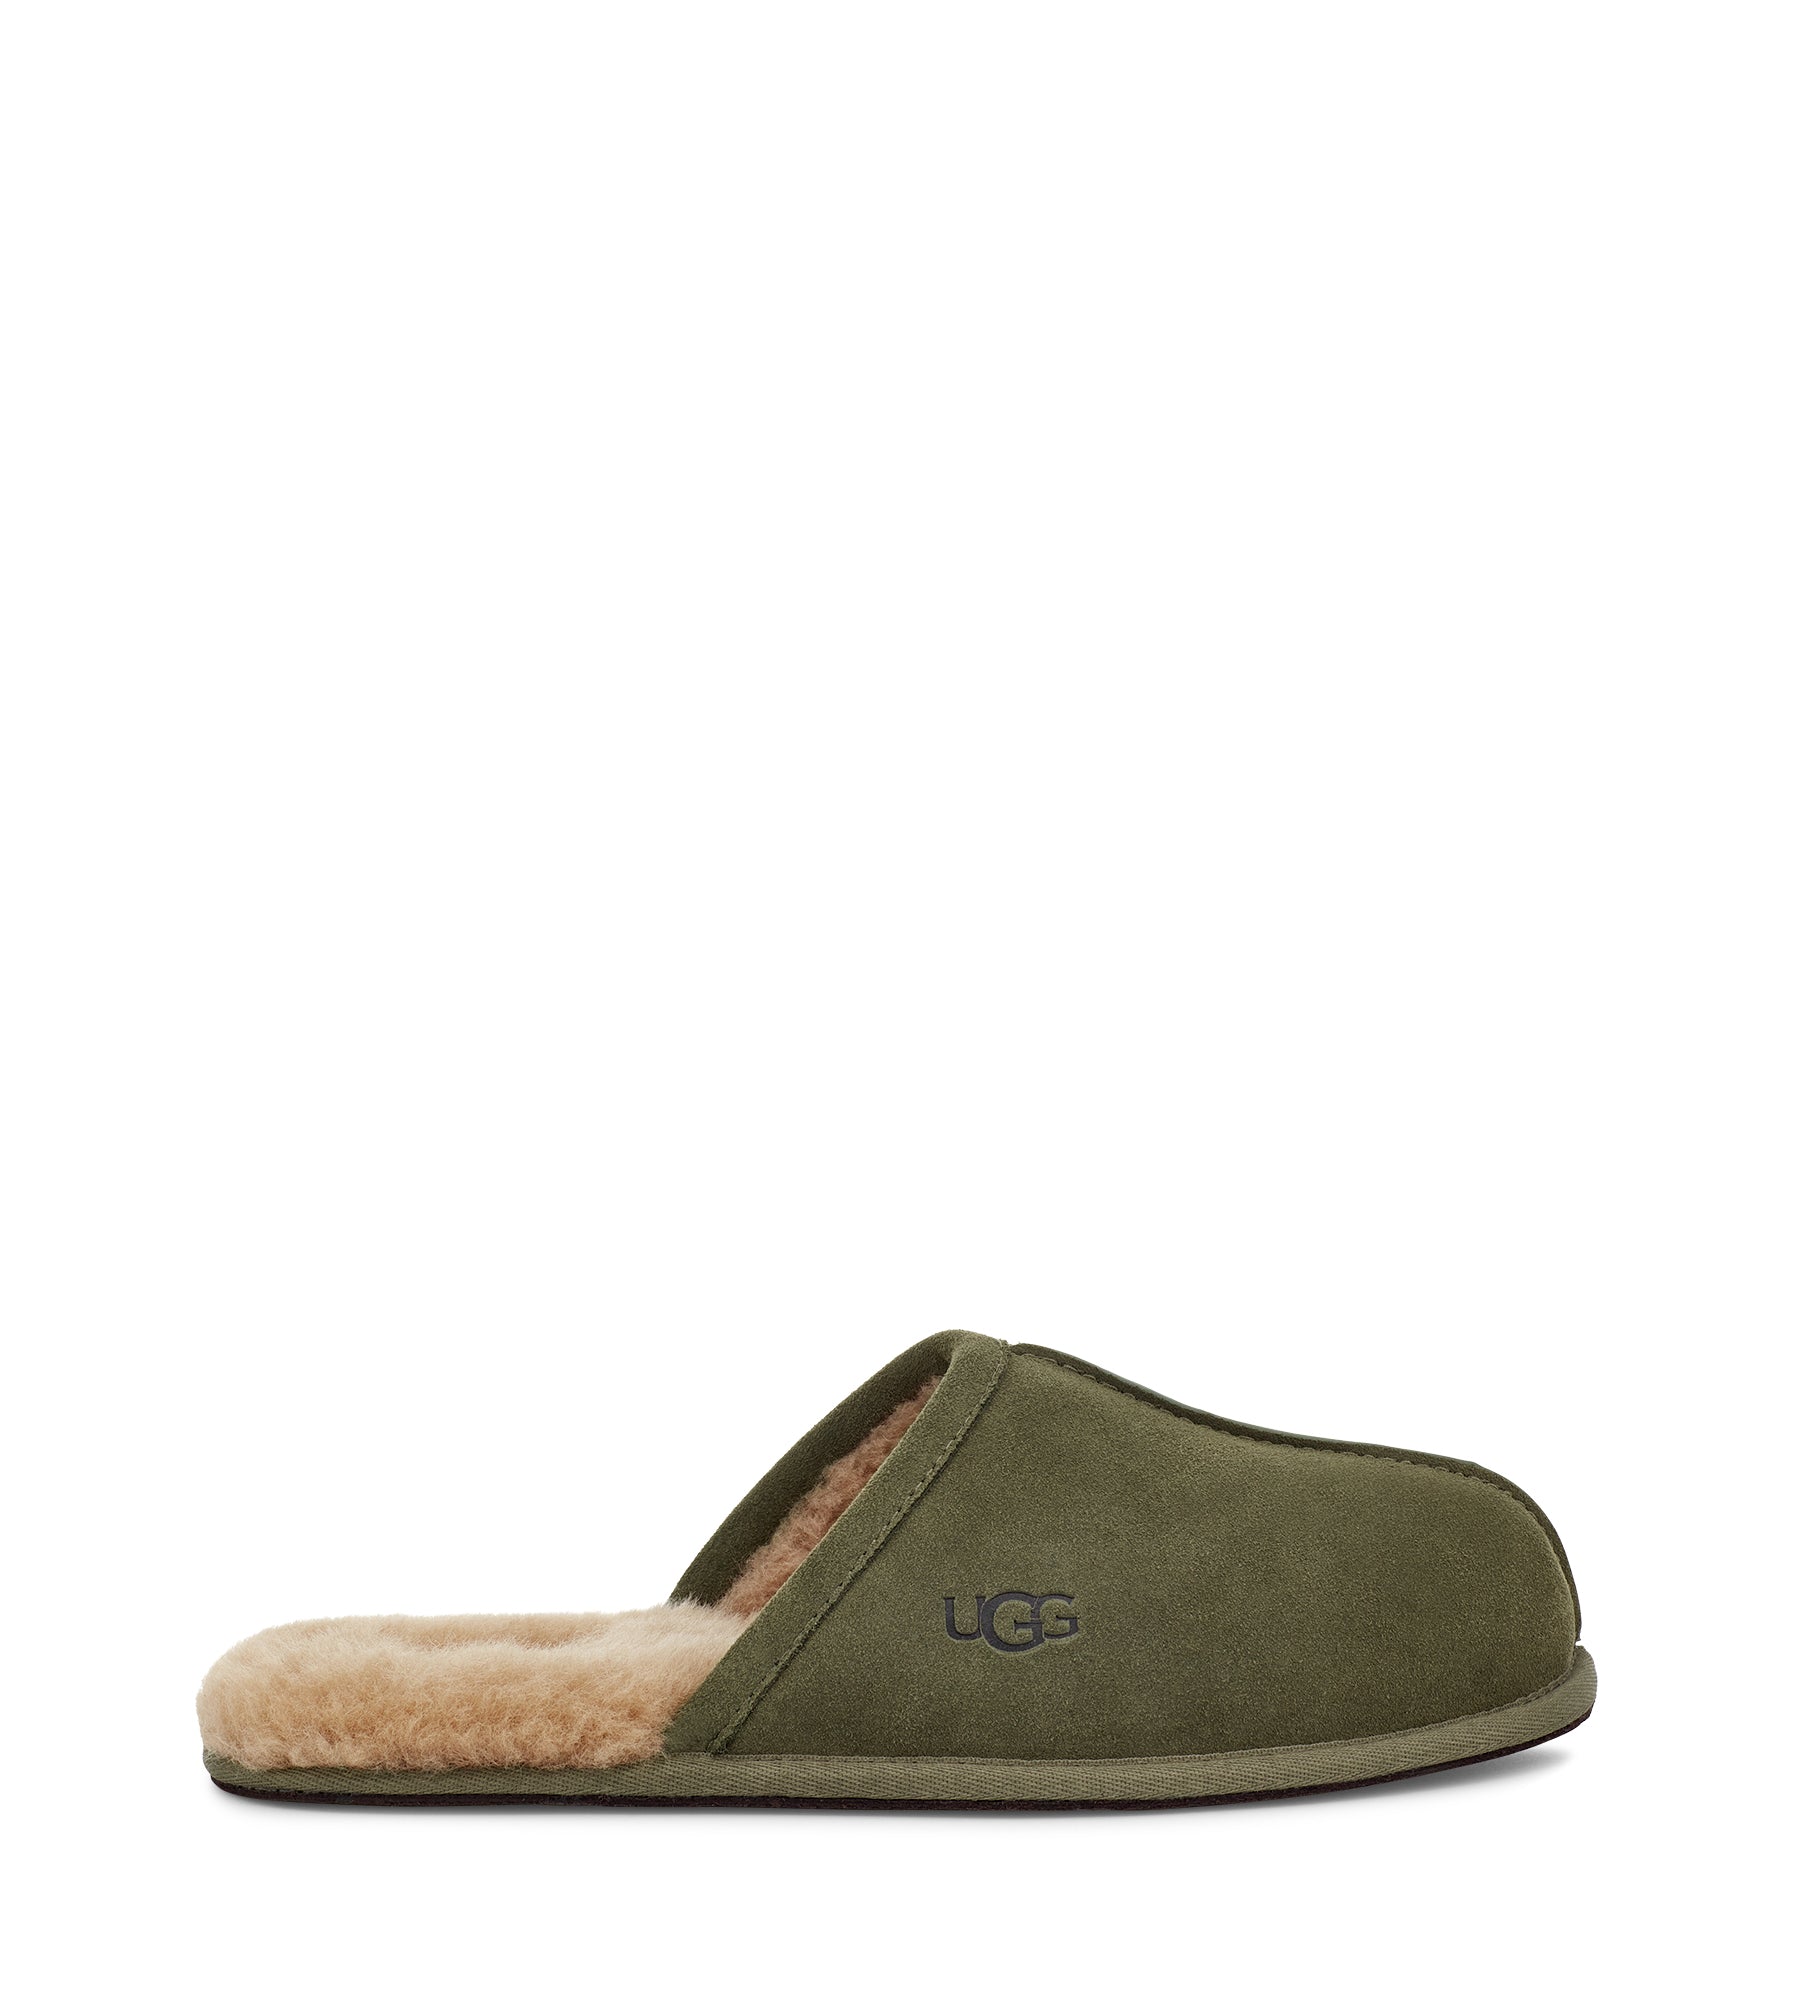 Sample UGG Scuff Slippers Burnt Olive 8 